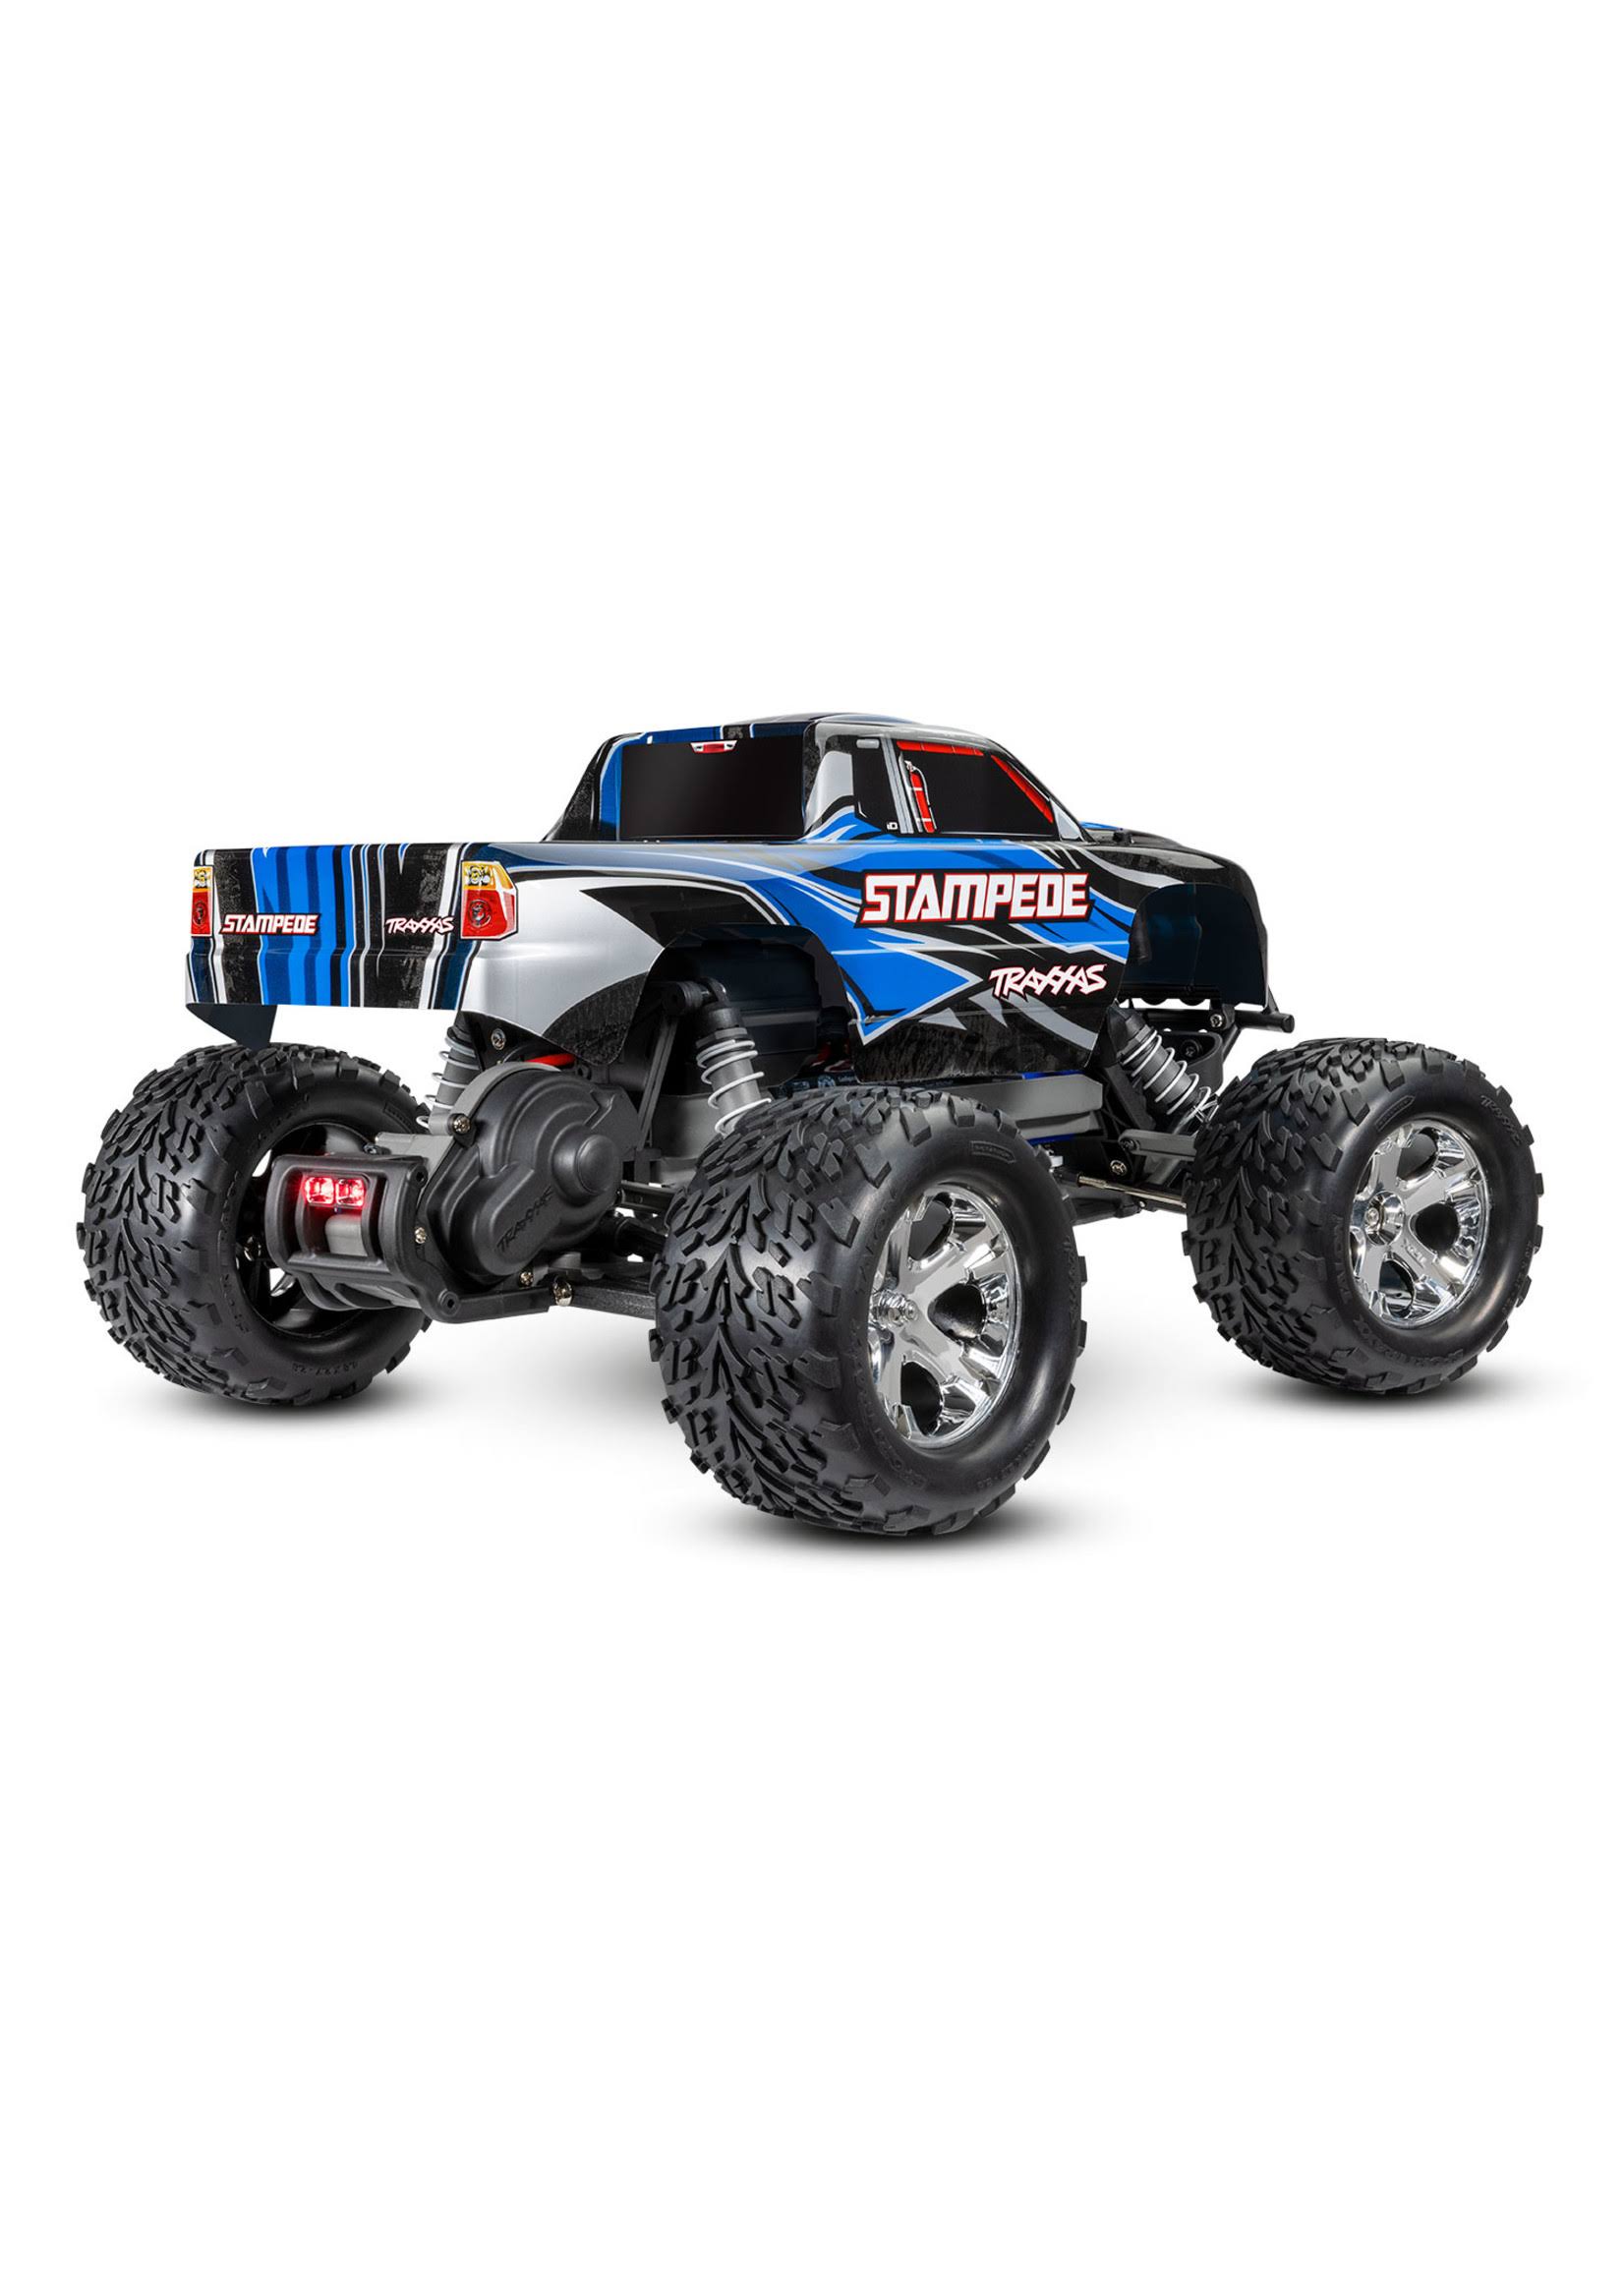 Traxxas Stampede 1/10 2wd XL-5 With Charger Battery & LED Lights Blue